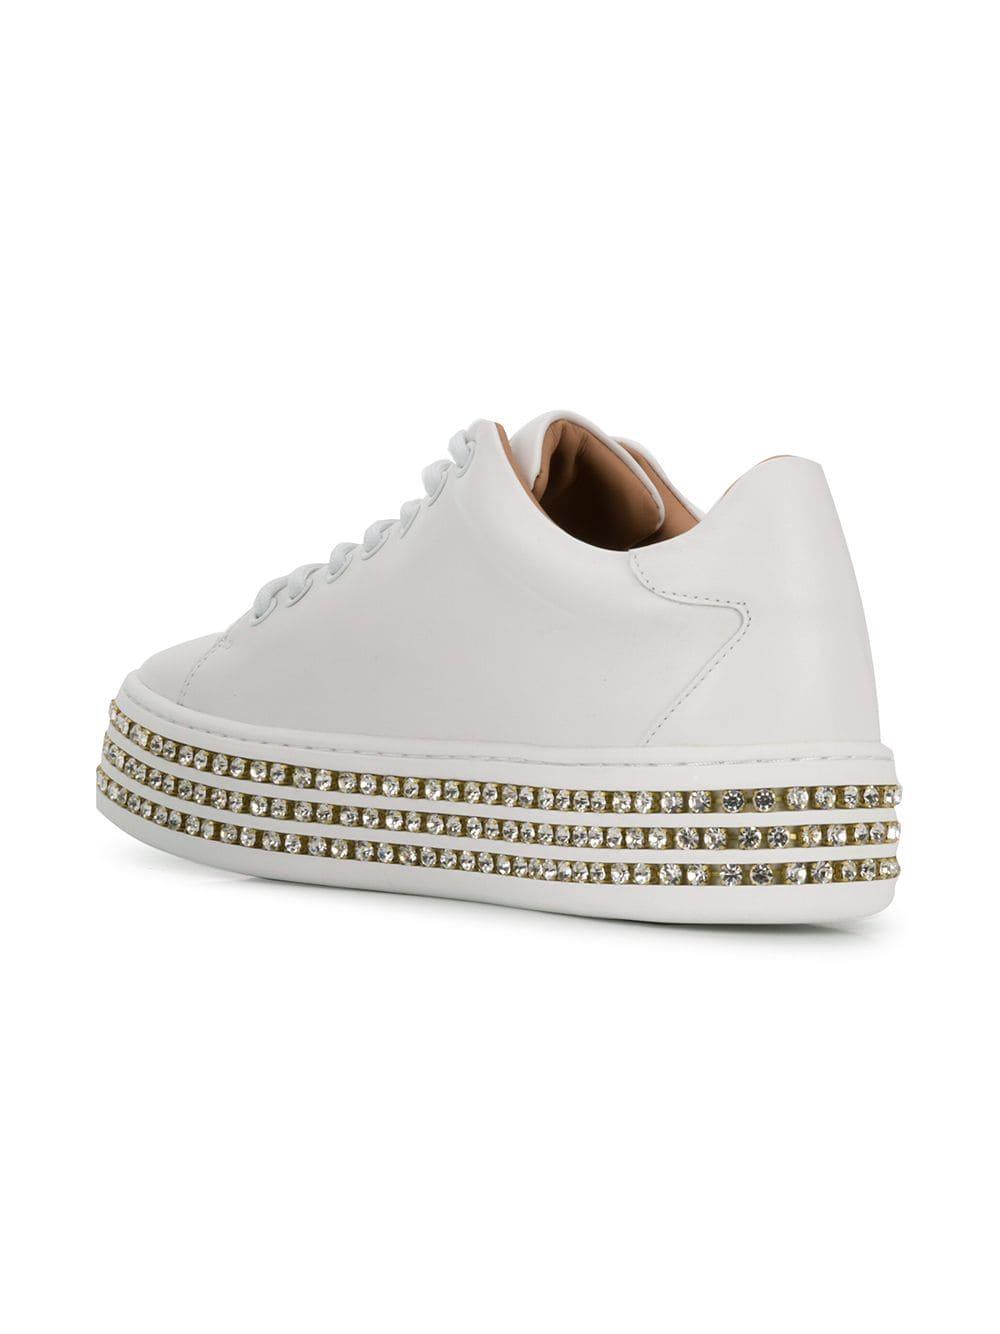 Twin Set Embellished Platform Sneakers in White - Lyst